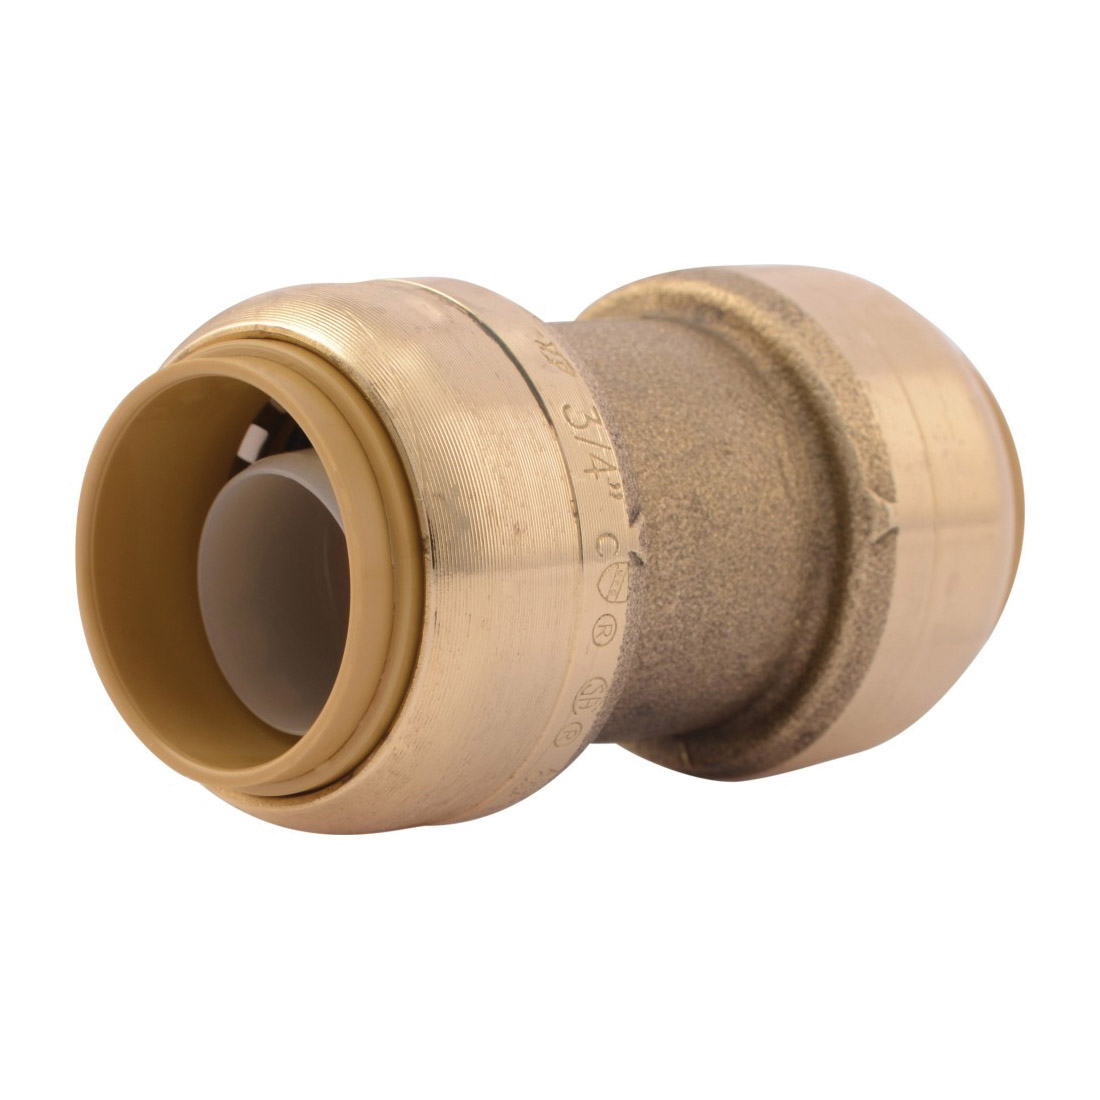 Sharkbite® U016LF Straight Pipe Coupling, 3/4 in Nominal, Push-Fit End Style, Brass, Import